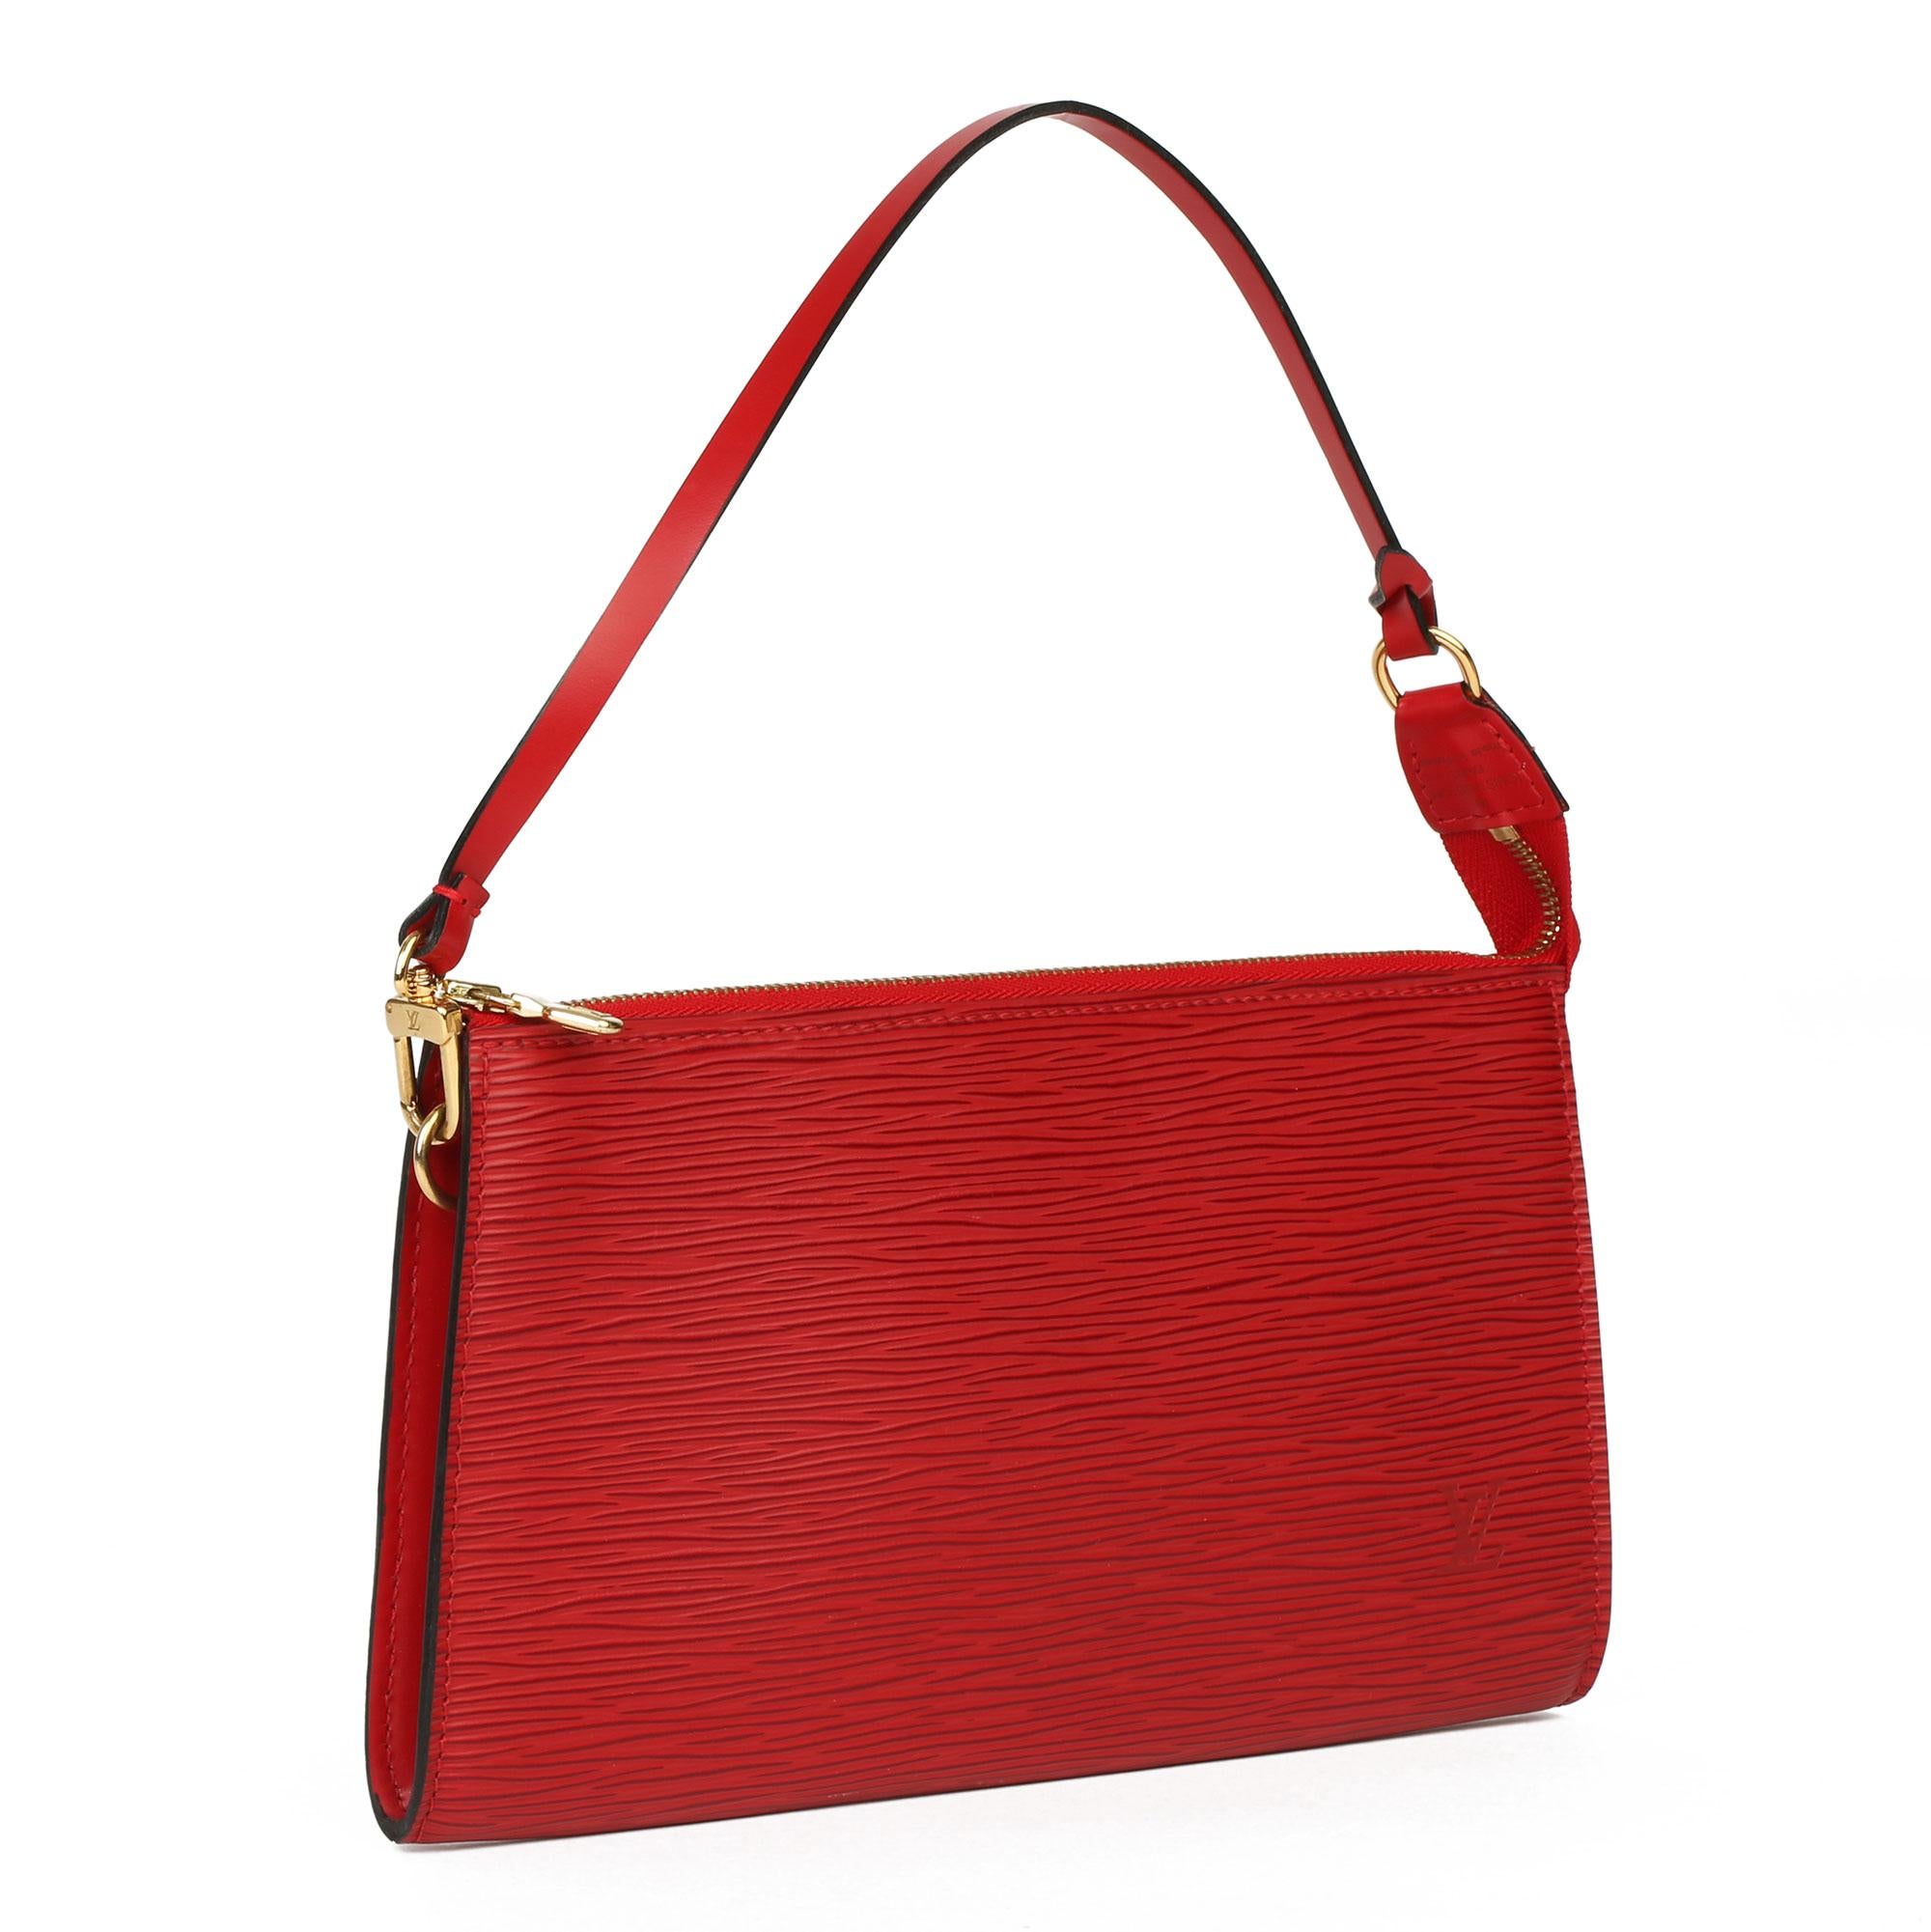 LOUIS VUITTON
Red Epi Leather Vintage Pochette Accessoires

Xupes Reference: CB305
Serial Number: AR0042
Age (Circa): 2002
Accompanied By: Louis Vuitton Dust Bag
Authenticity Details: Date Stamp (Made in France) 
Gender: Ladies
Type: Top Handle,